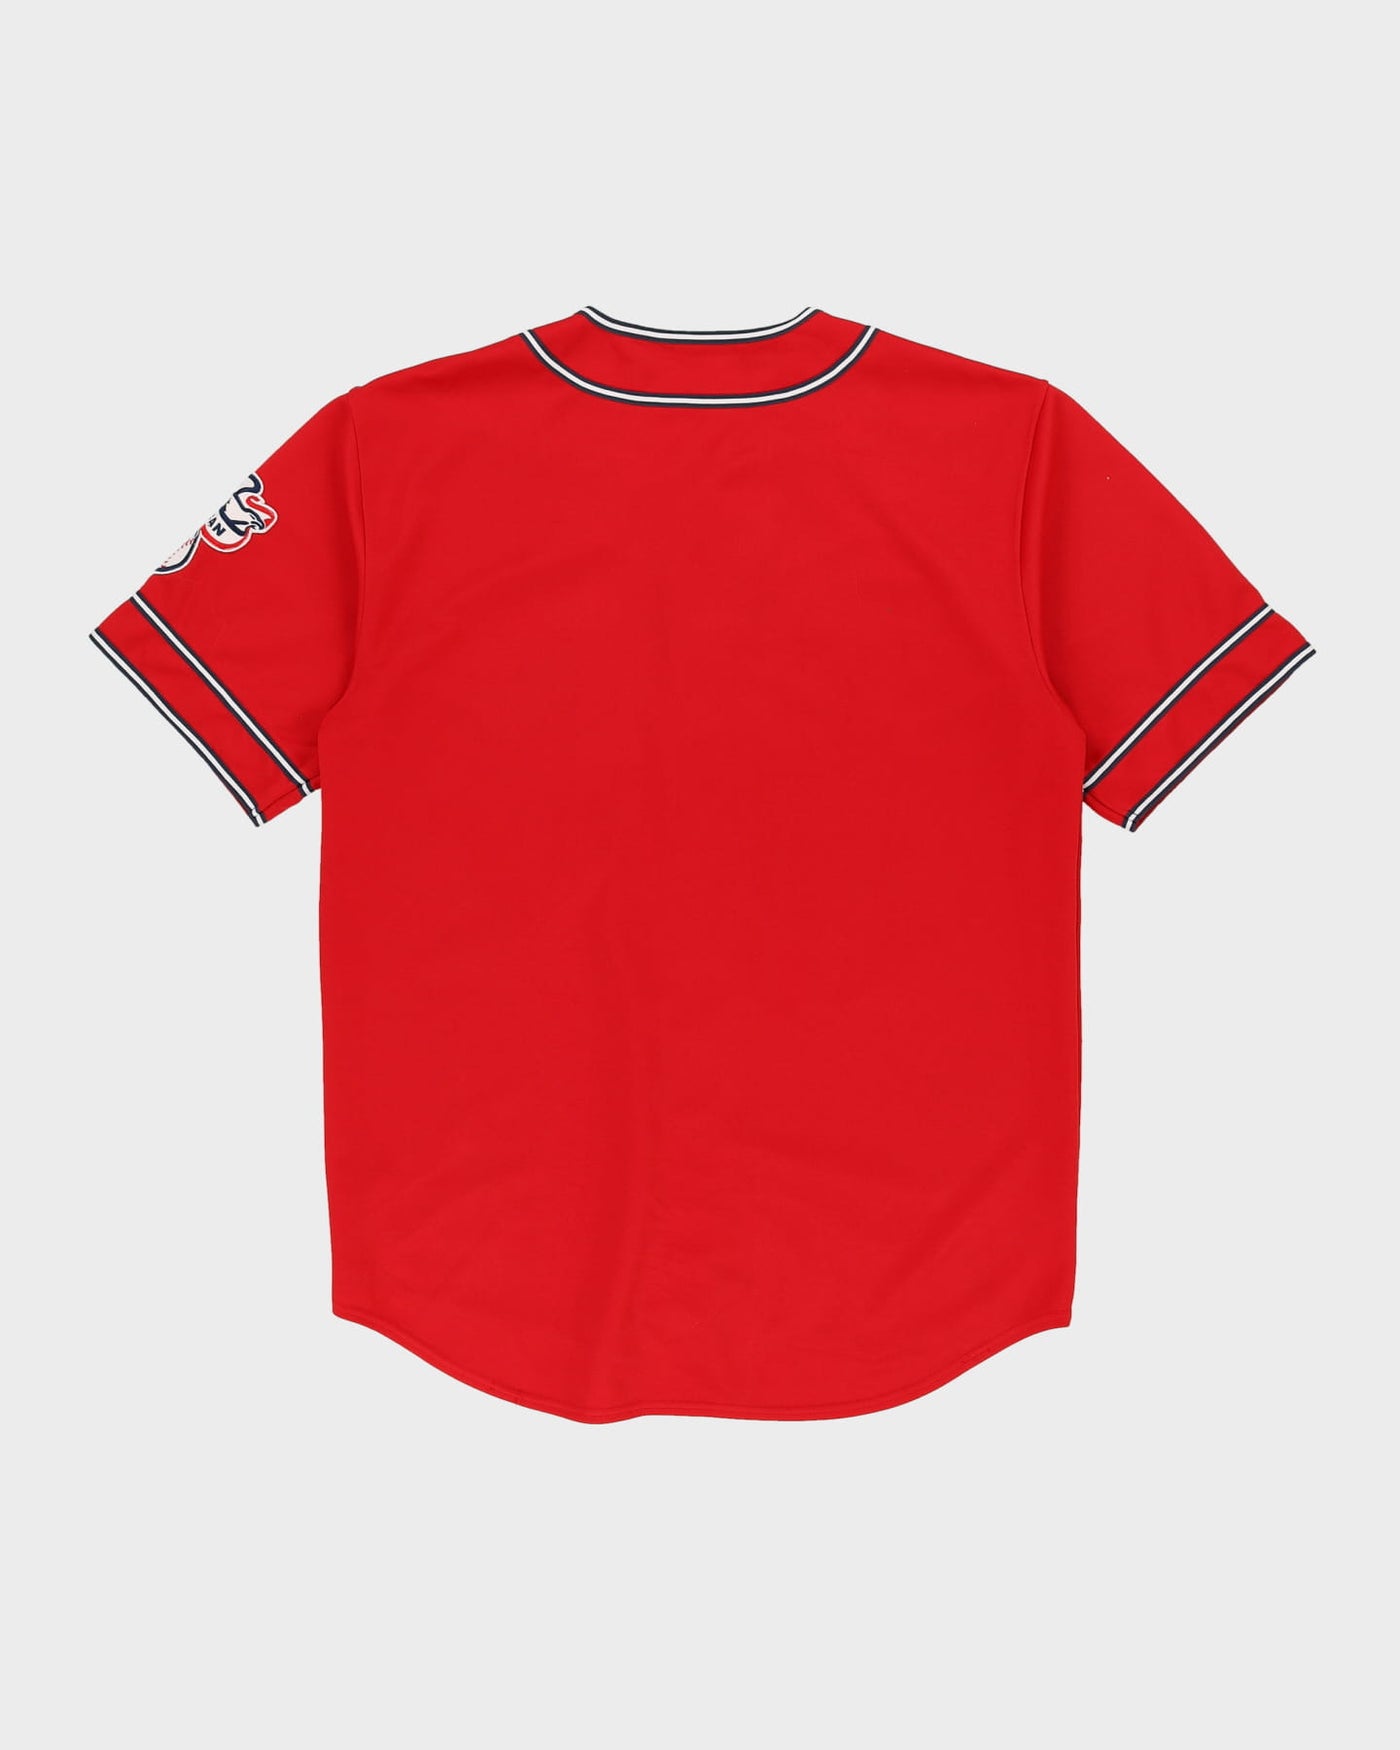 00s LA Los Angeles Angels Red Button Up Baseball Jersey - XL